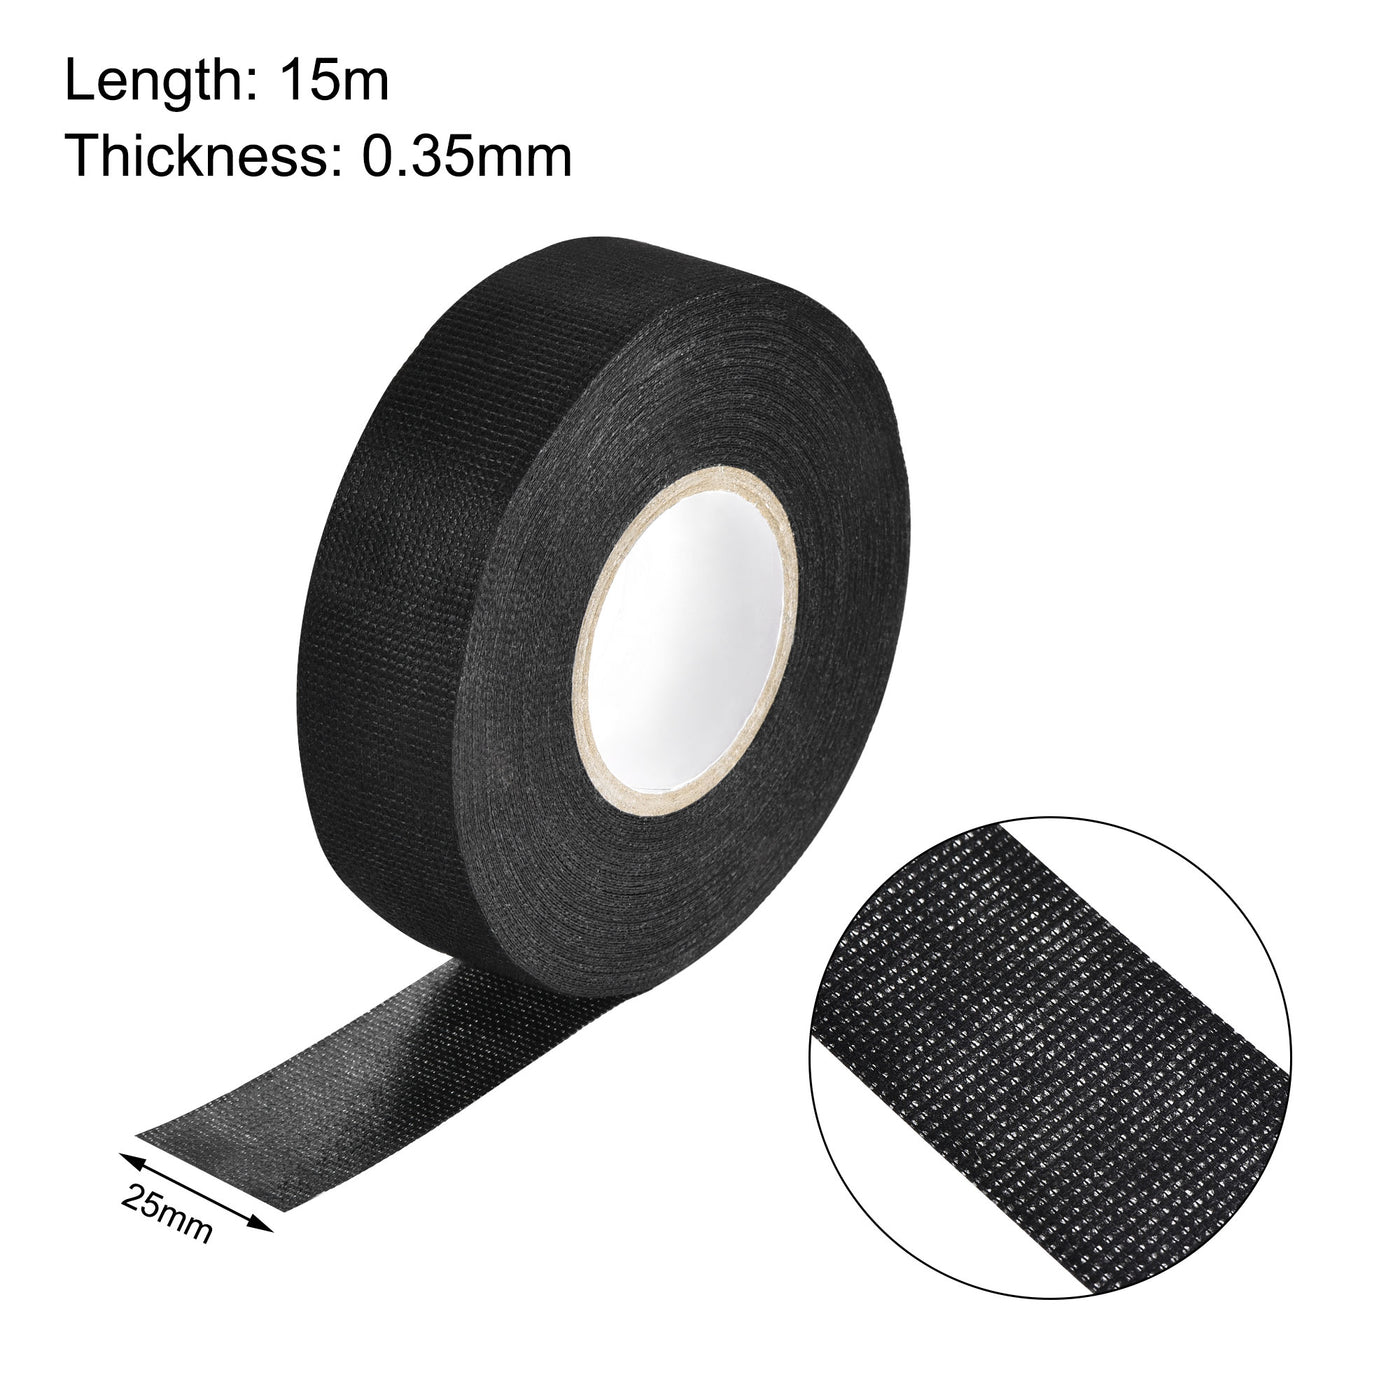 uxcell Uxcell Adhesive Cloth Fabric Tape Wire Harness Looms Single-Side 25mm x 15m Black